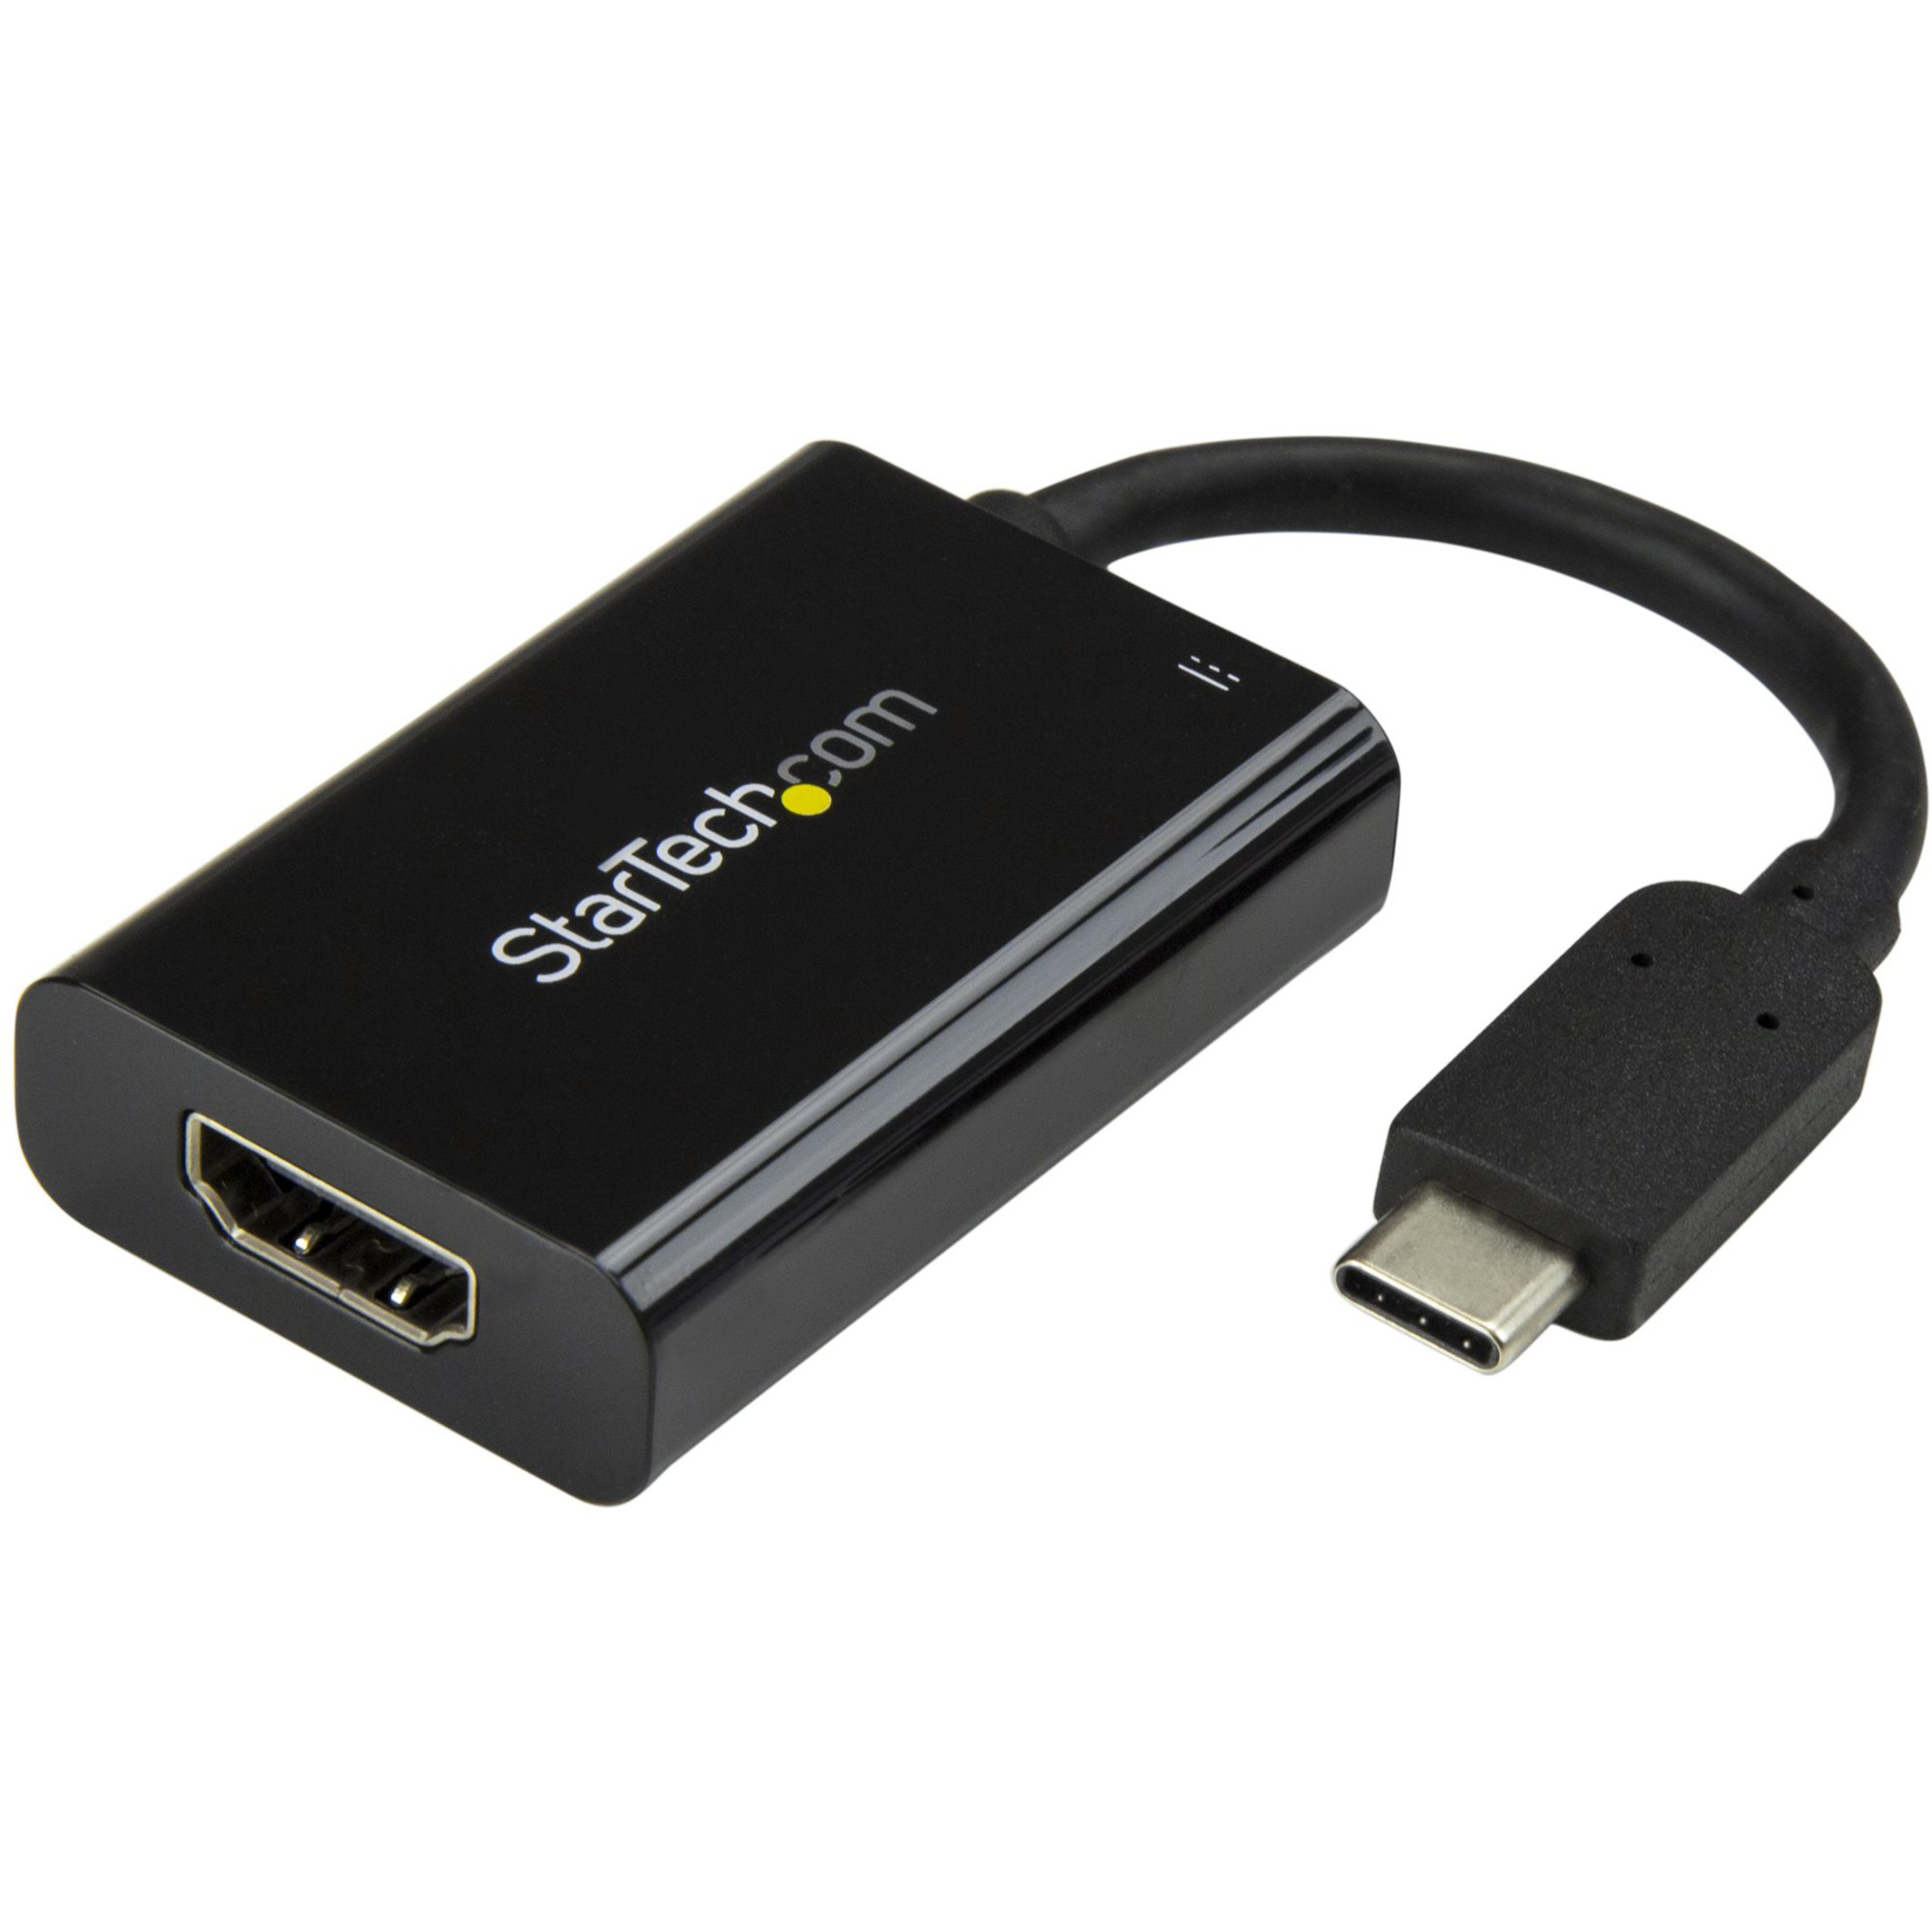 Startech .com USB C to HDMI 2.0 Adapter 4K 60Hz with 60W Power Delivery Pass-Through ChargingUSB Type-C to HDMI Video ConverterBlackBl… CDP2HDUCP